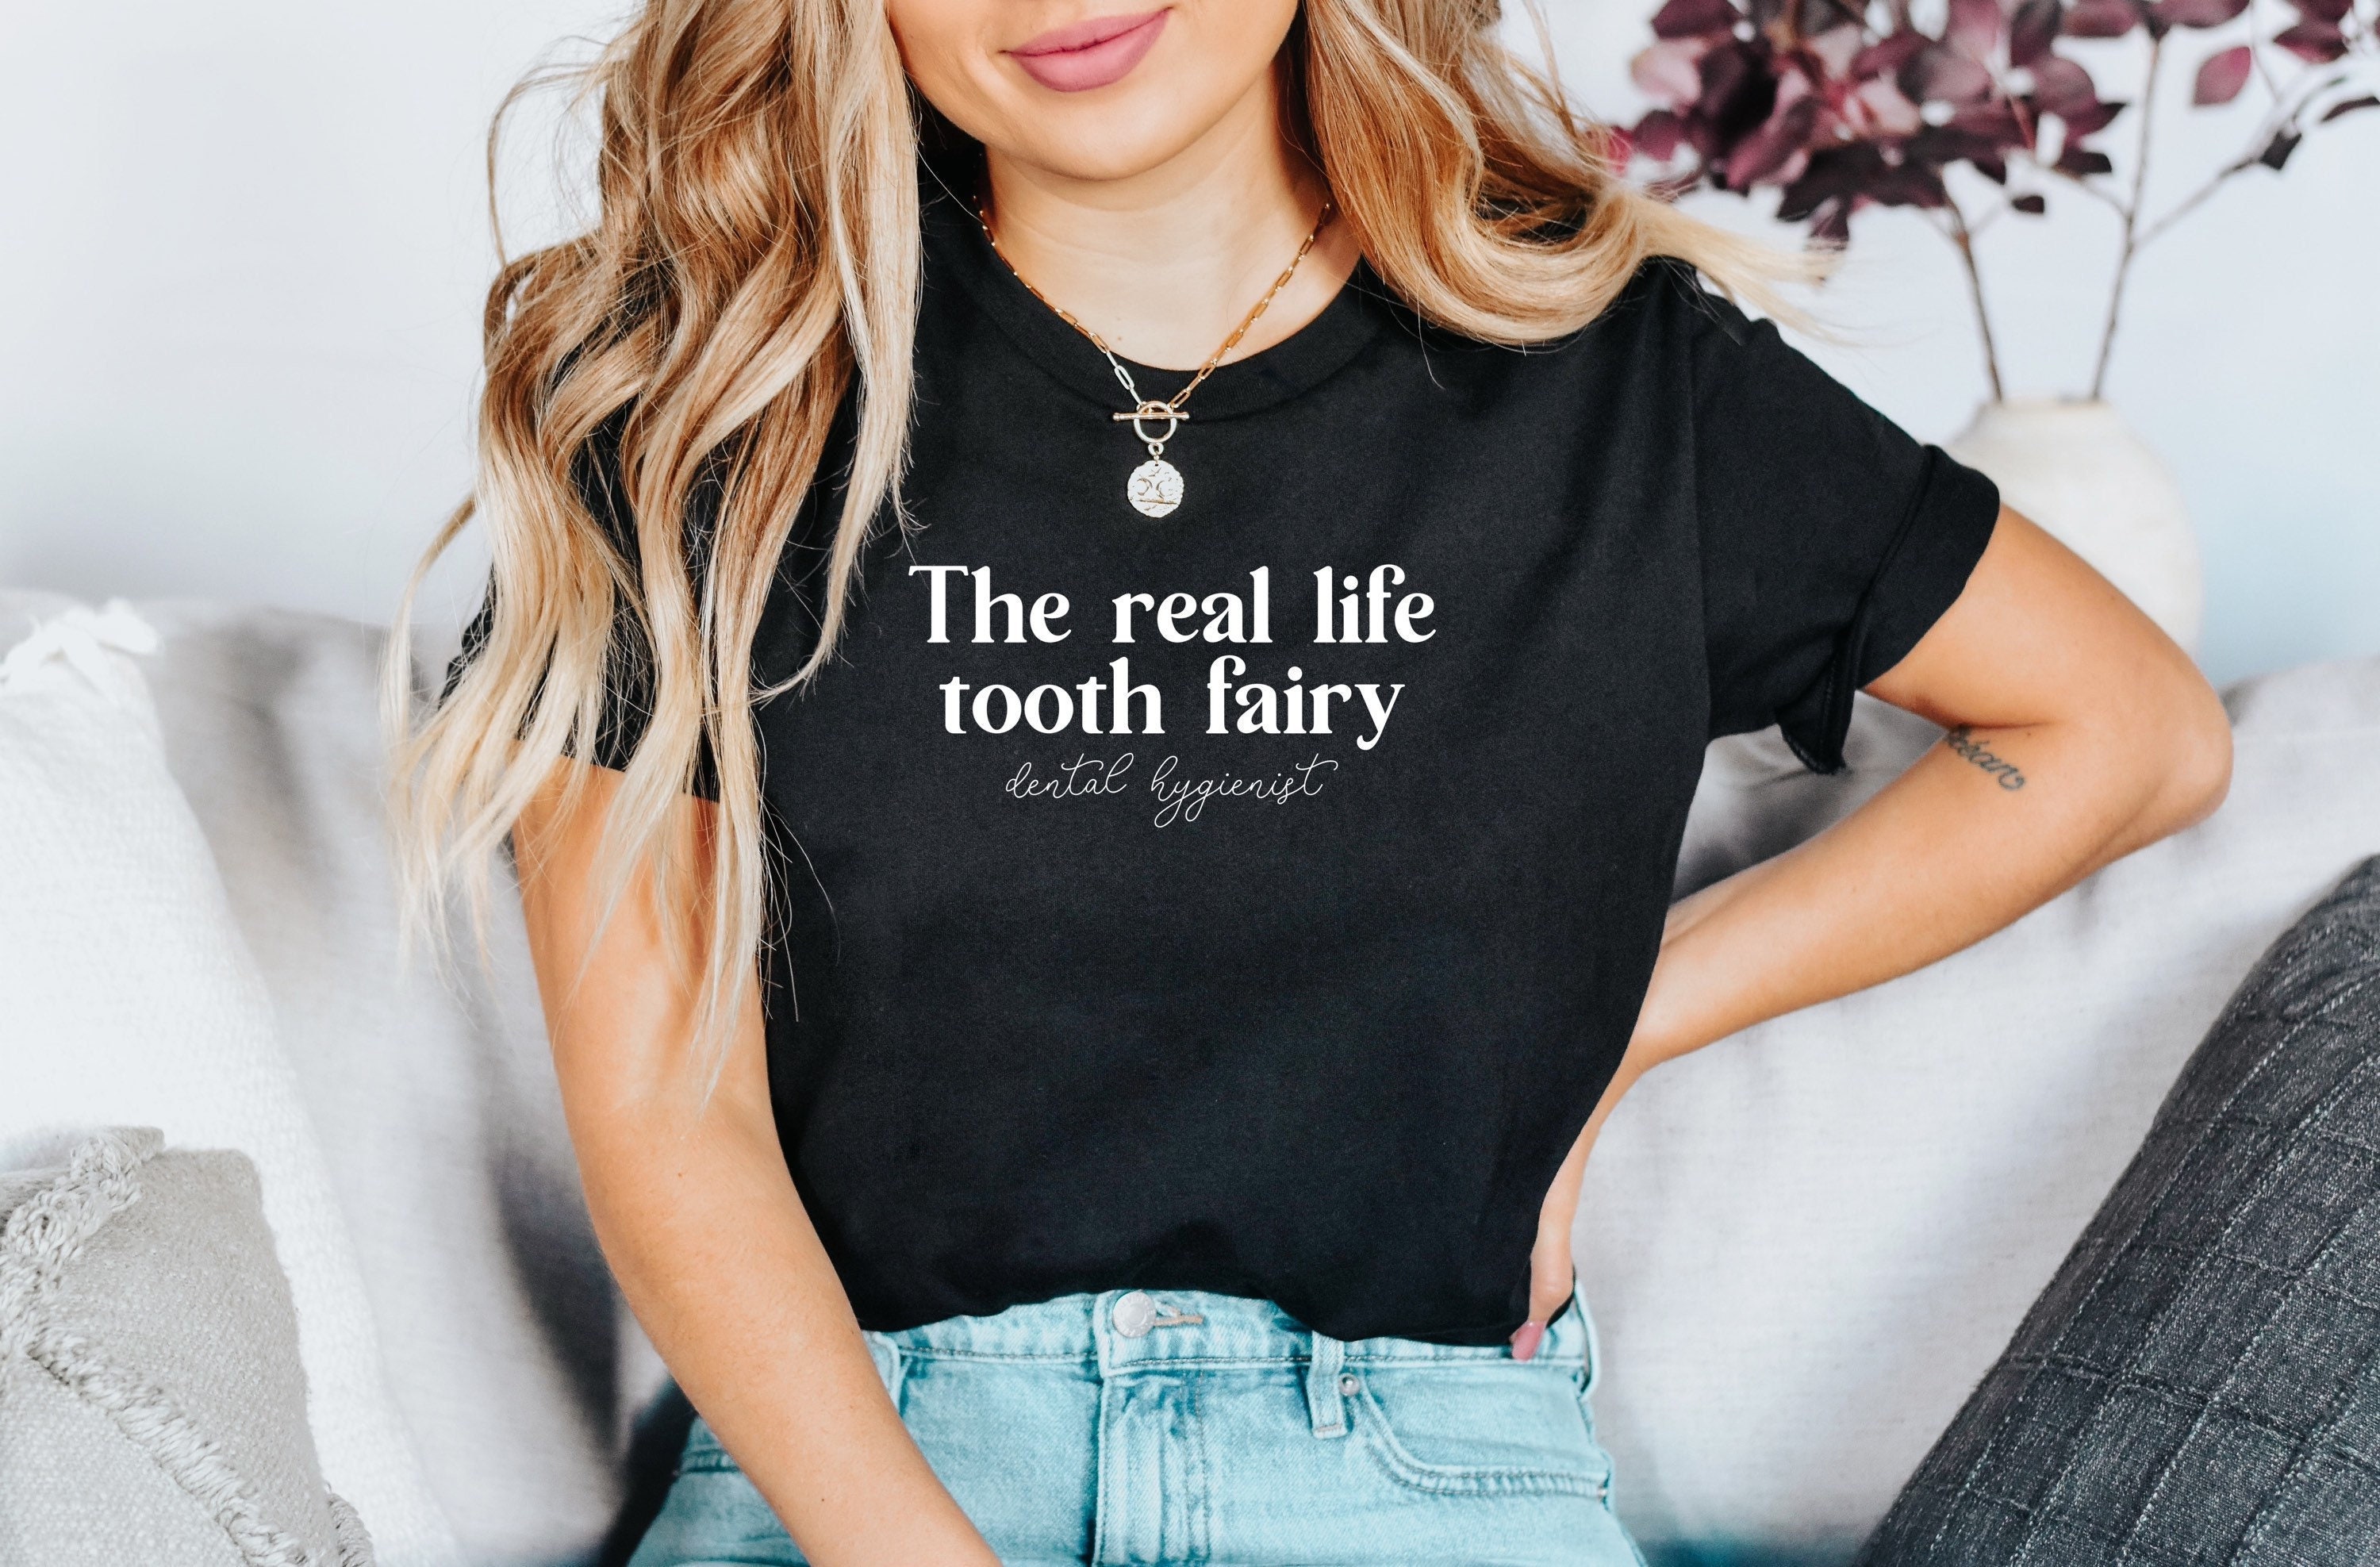 The Real Life Tooth Fairy Dental Hygienist Shirt, dh rdh ldh registered dentistry licensed teeth tooth school student dentistry gift grad